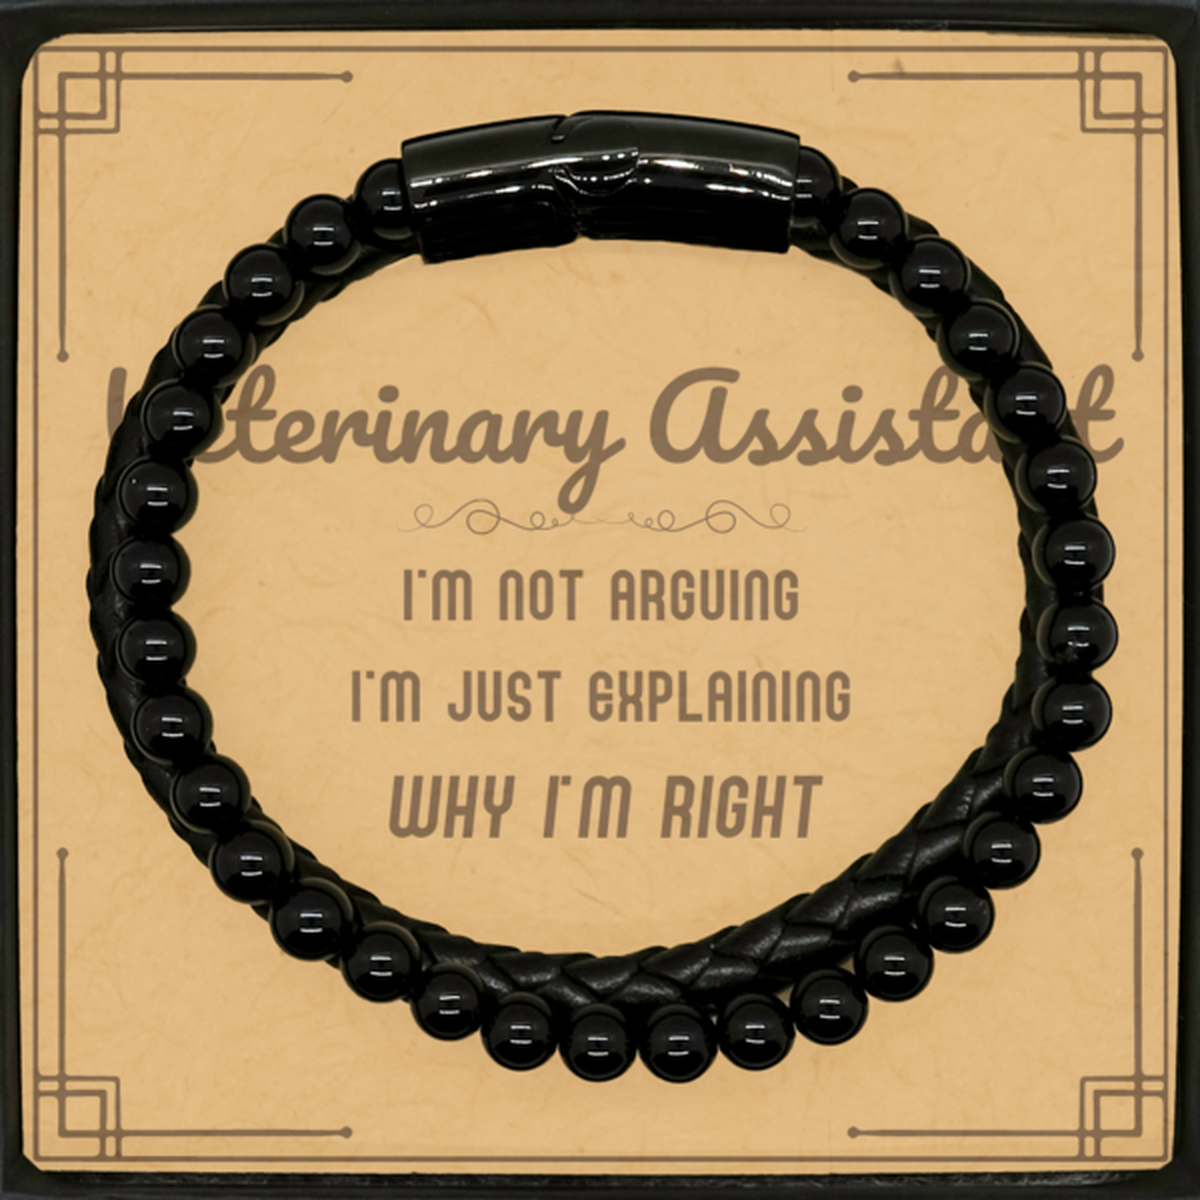 Veterinary Assistant I'm not Arguing. I'm Just Explaining Why I'm RIGHT Stone Leather Bracelets, Funny Saying Quote Veterinary Assistant Gifts For Veterinary Assistant Message Card Graduation Birthday Christmas Gifts for Men Women Coworker